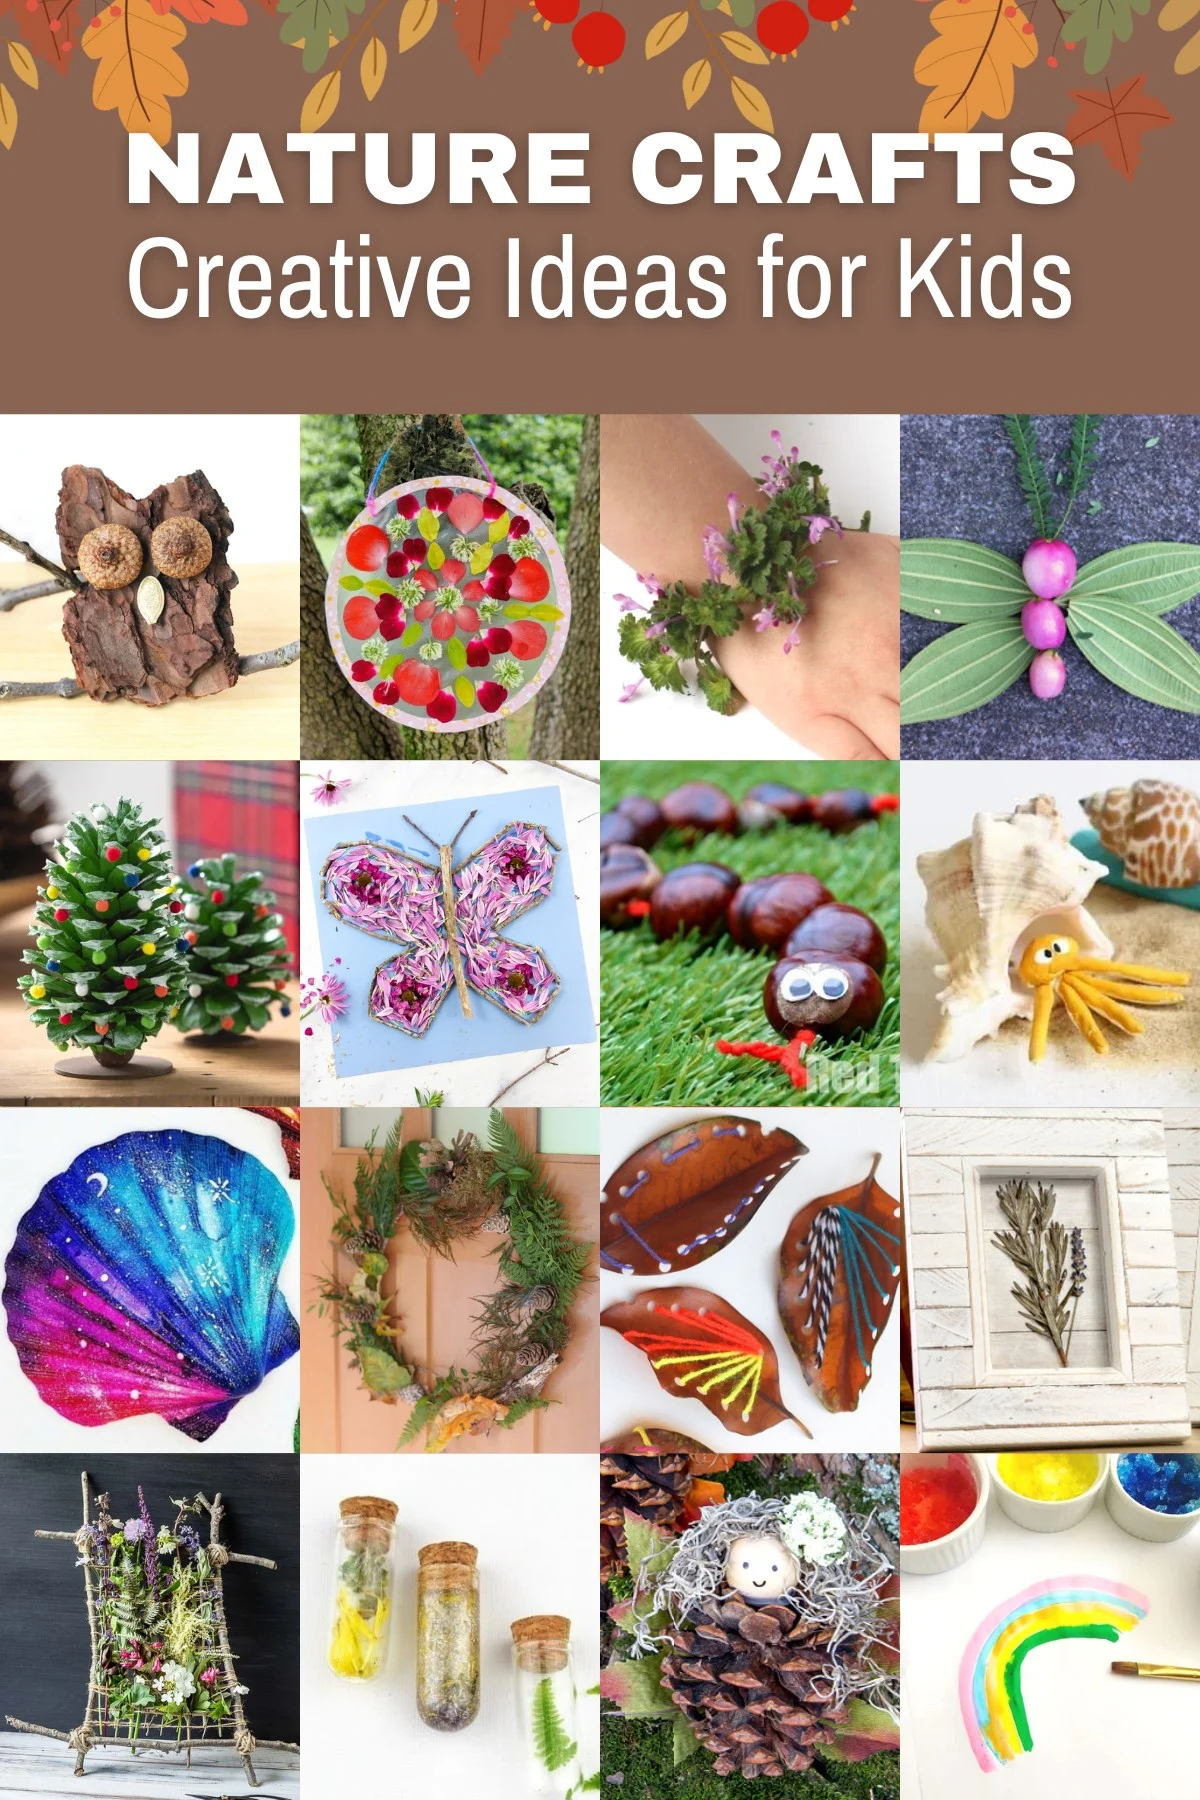 30 SEASHELL CRAFTS for kids and adults for a creative summer.